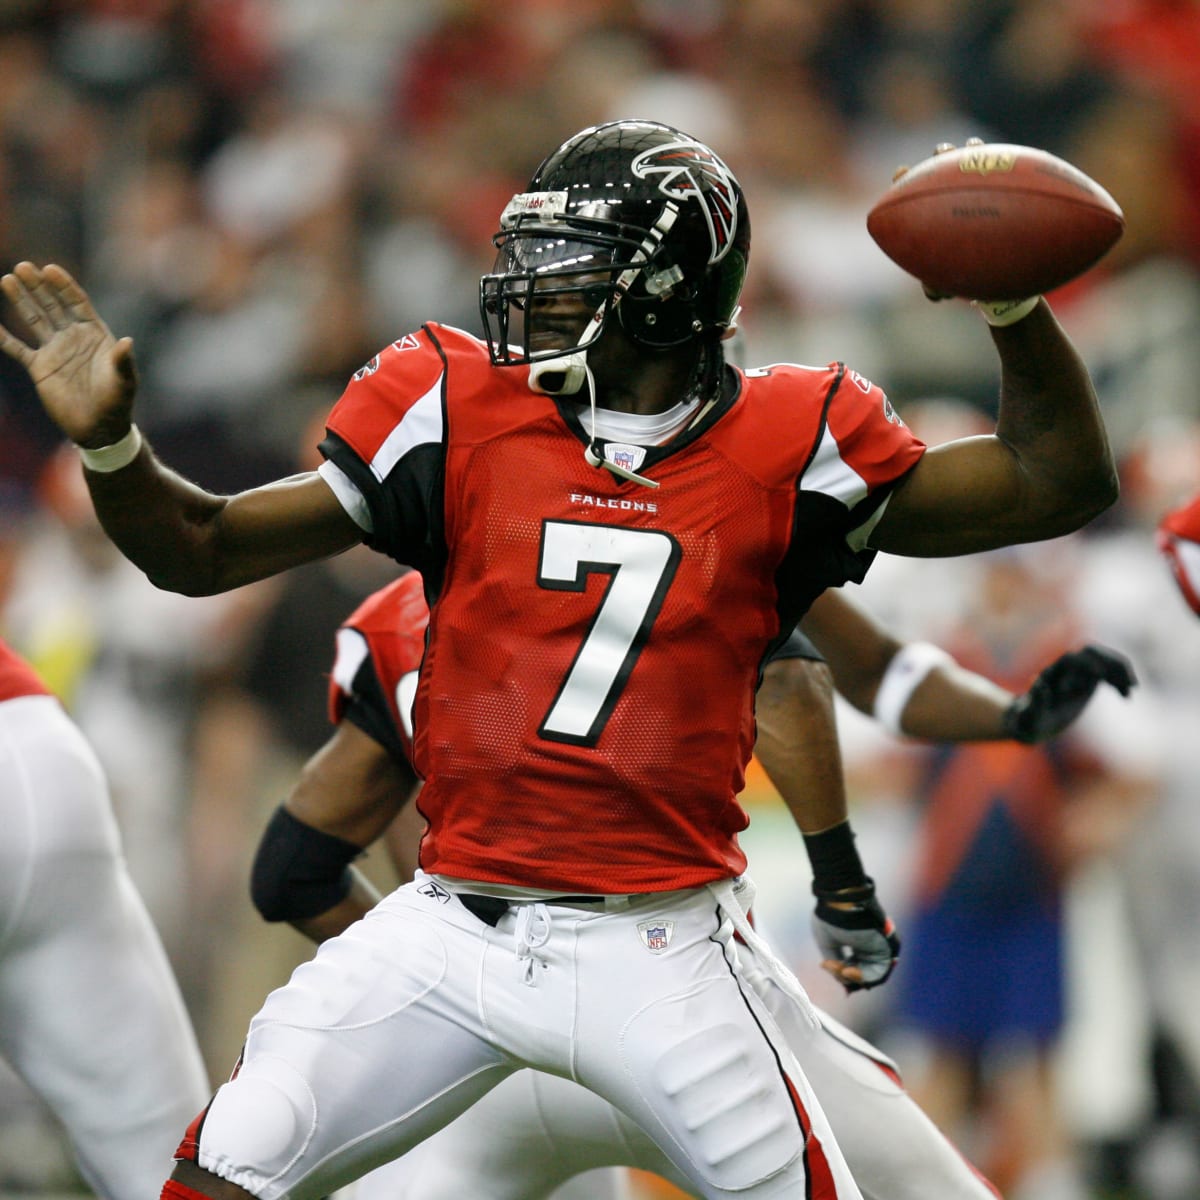 the best of michael vick